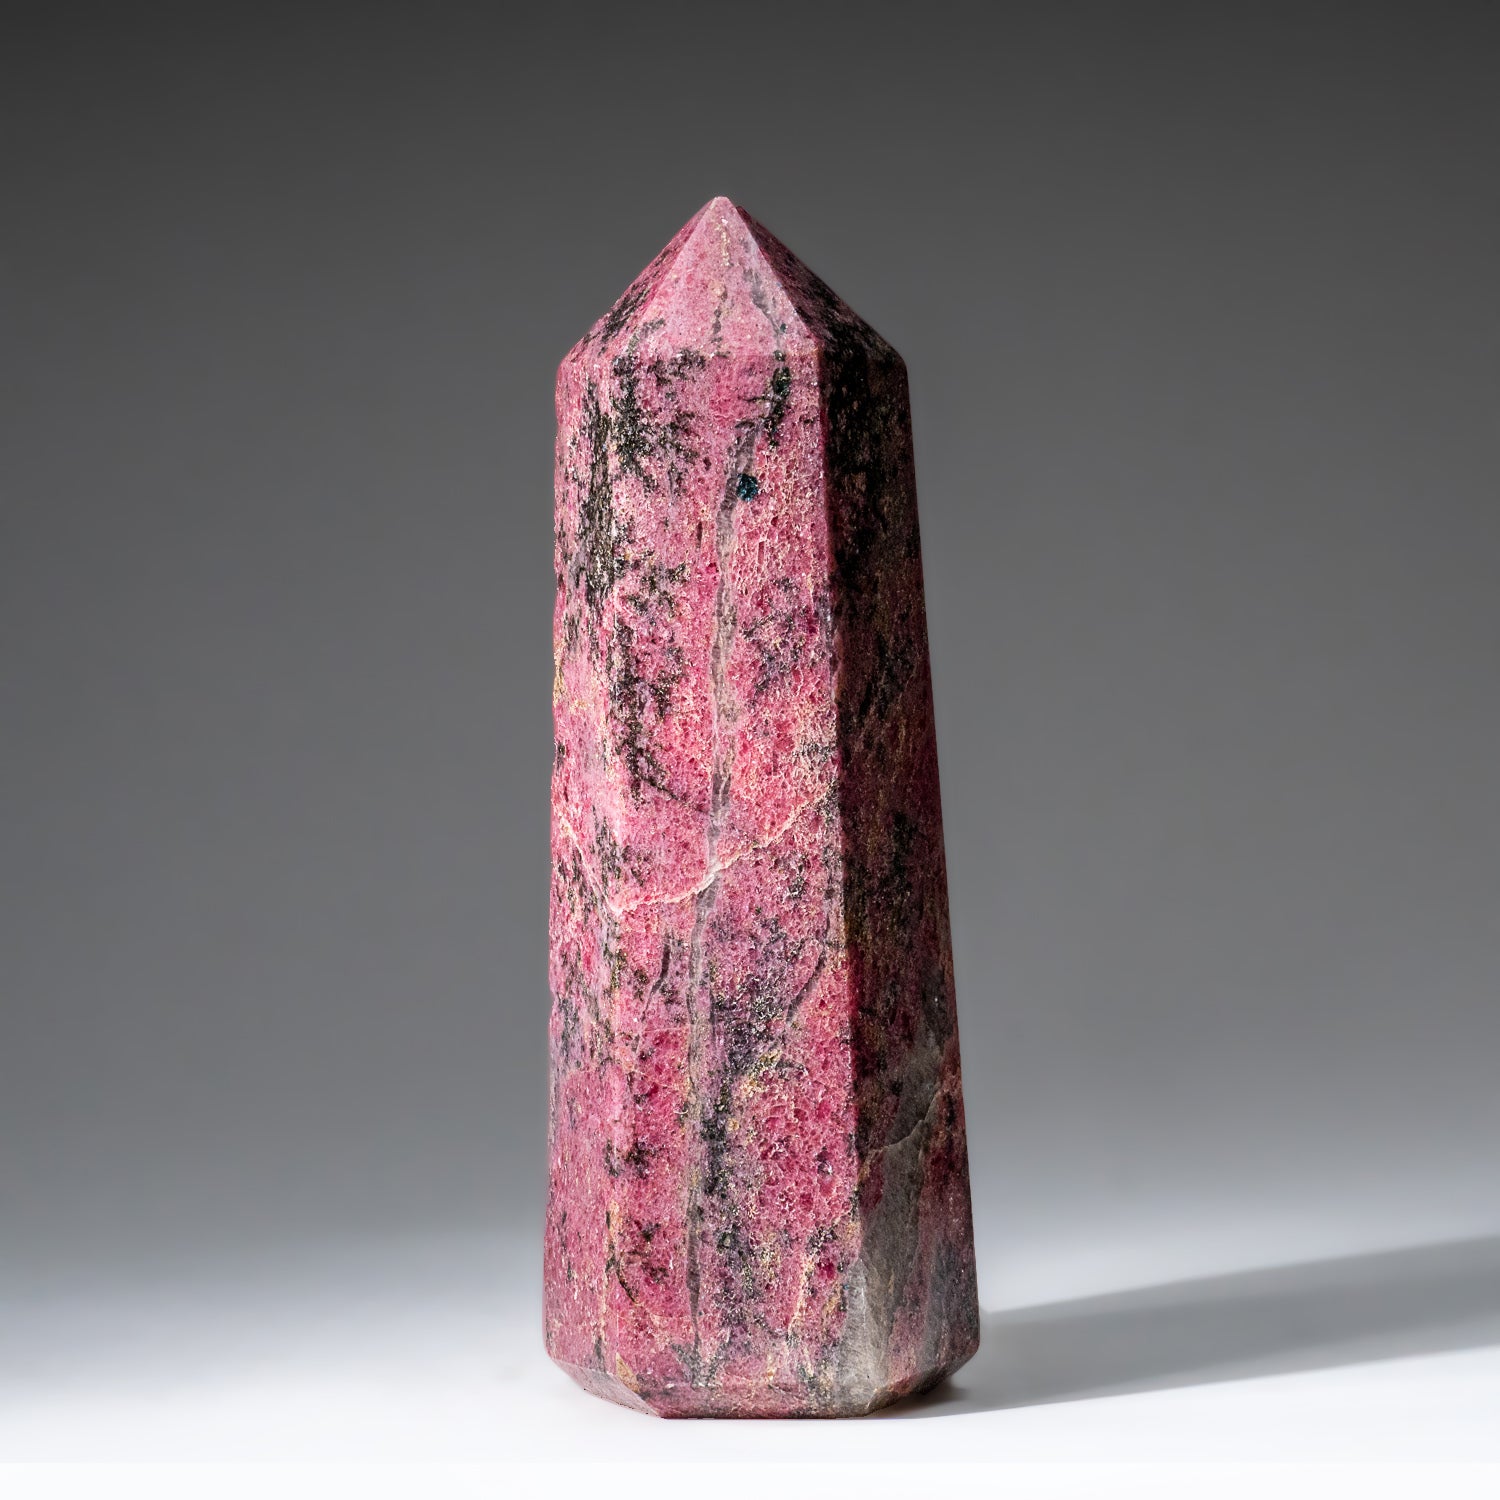 Genuine Polished Imperial Rhodonite Point from Madagascar (2.8 lbs)